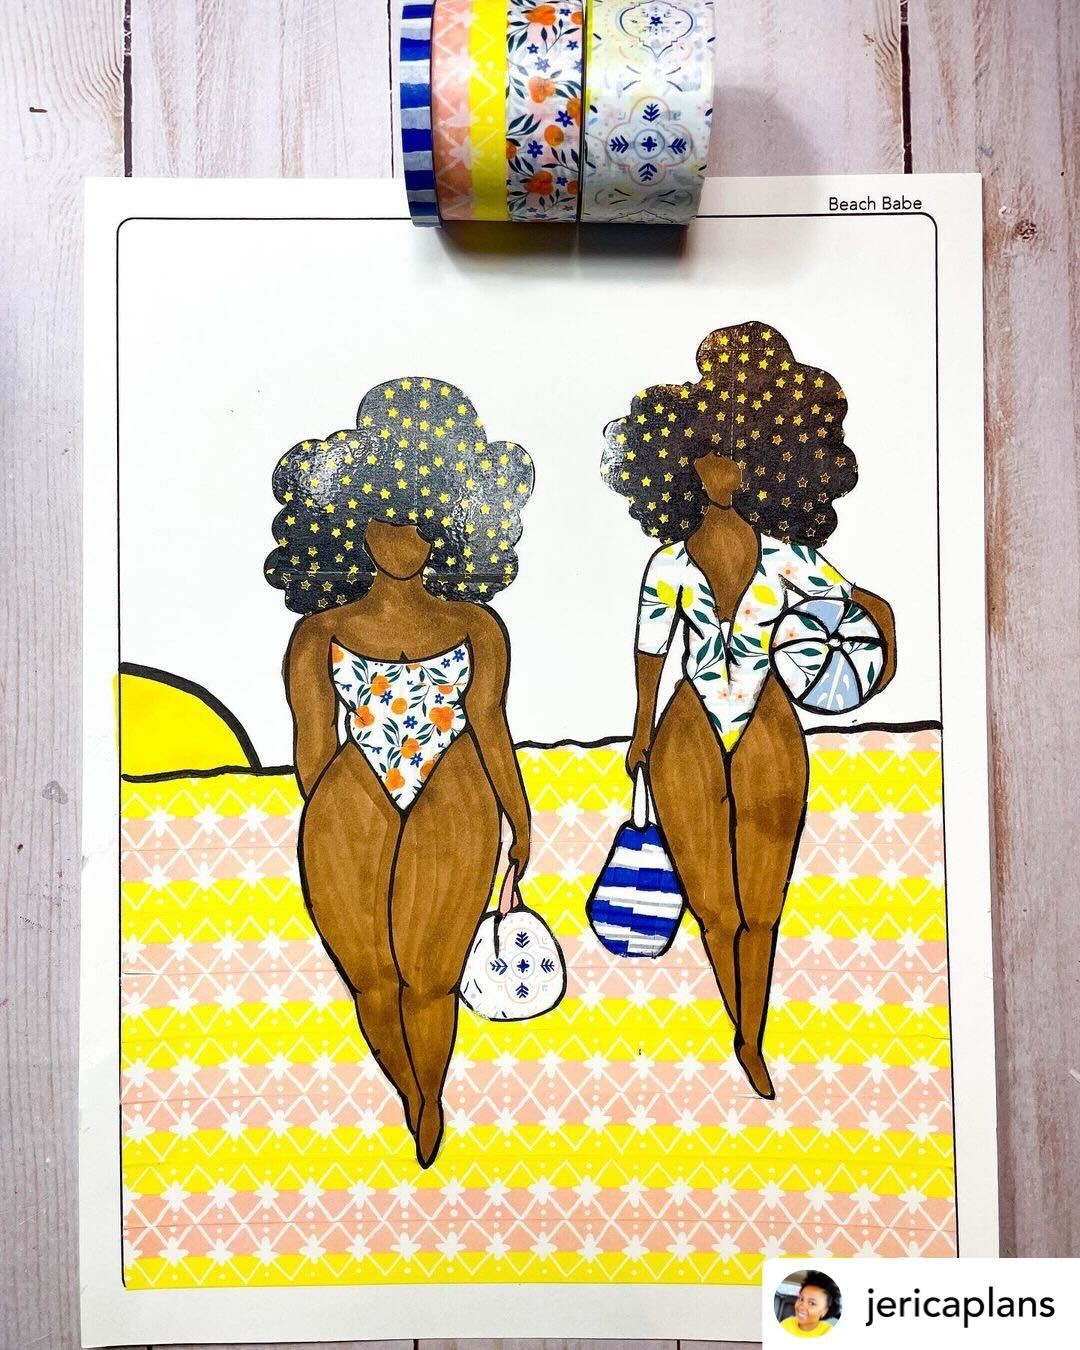 washi tape art of two women walking on the beach in swimsuits with beach bags